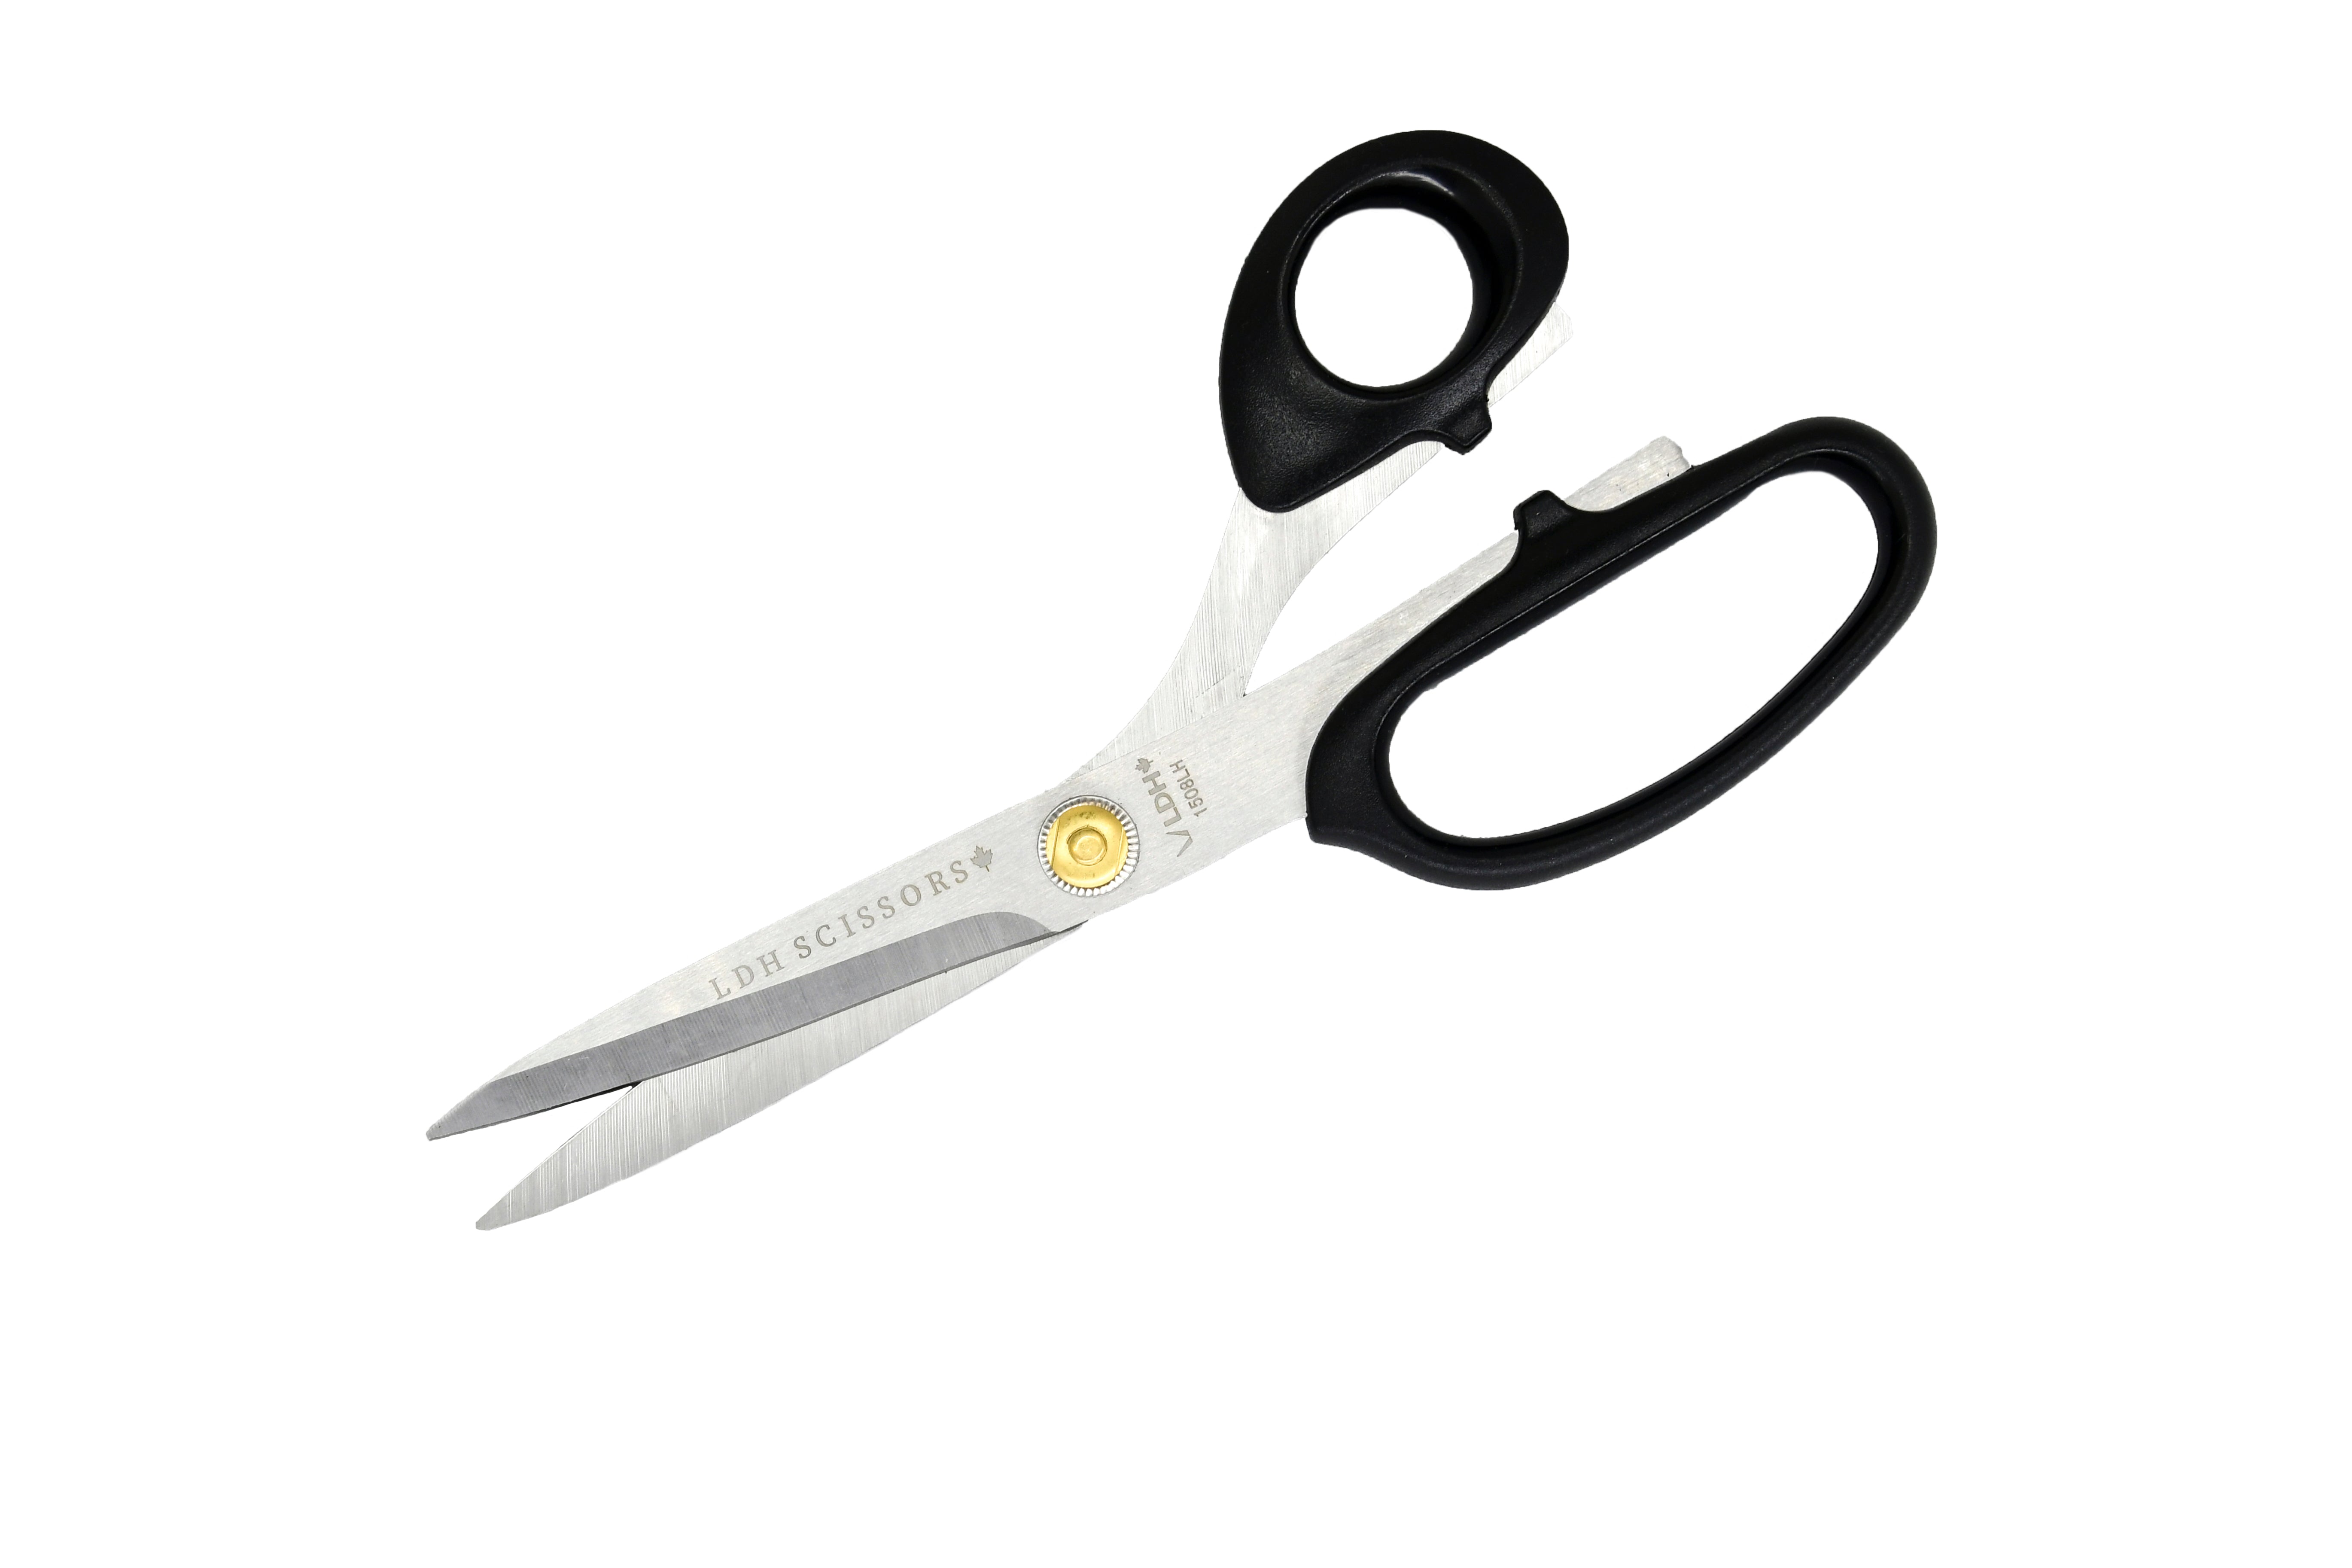 KAI 8-1/2 Left Handed Shears N5220L – The Sewing Studio Fabric